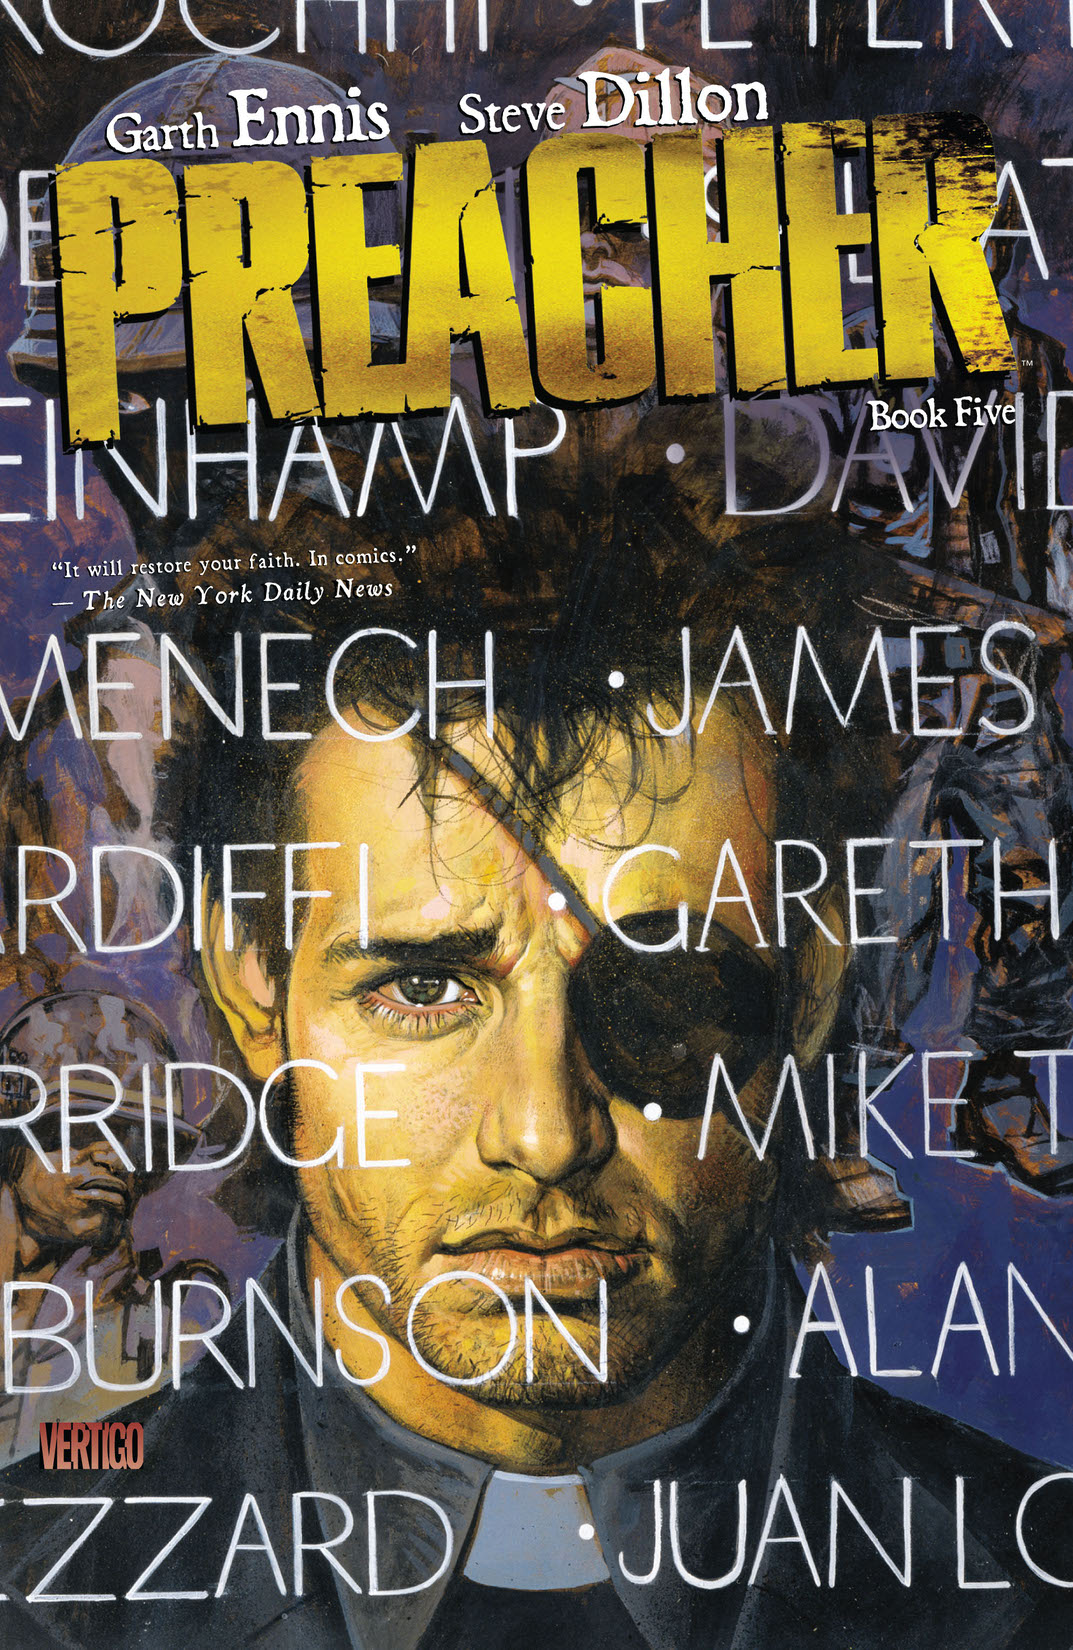 Preacher Book Five preview images